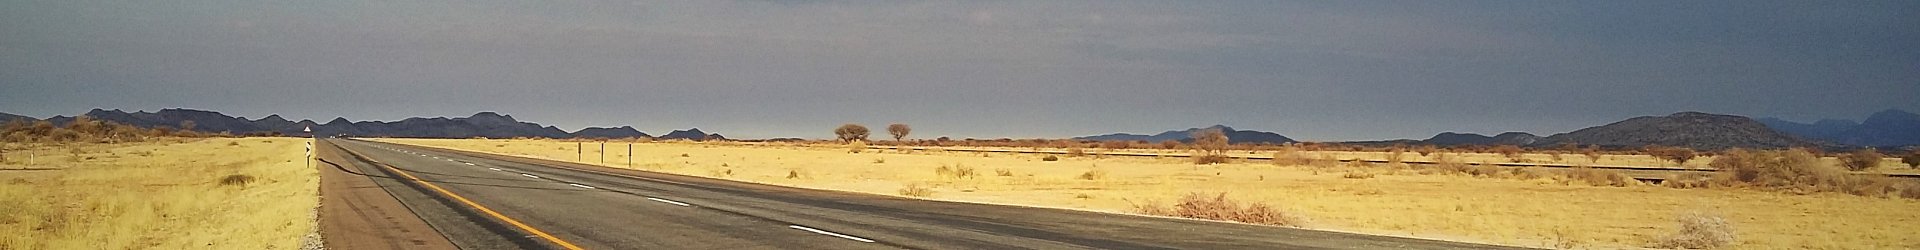 local-travel-namibia-car-rental-contact-us-page-cover-image-endless-road-to-nowhere